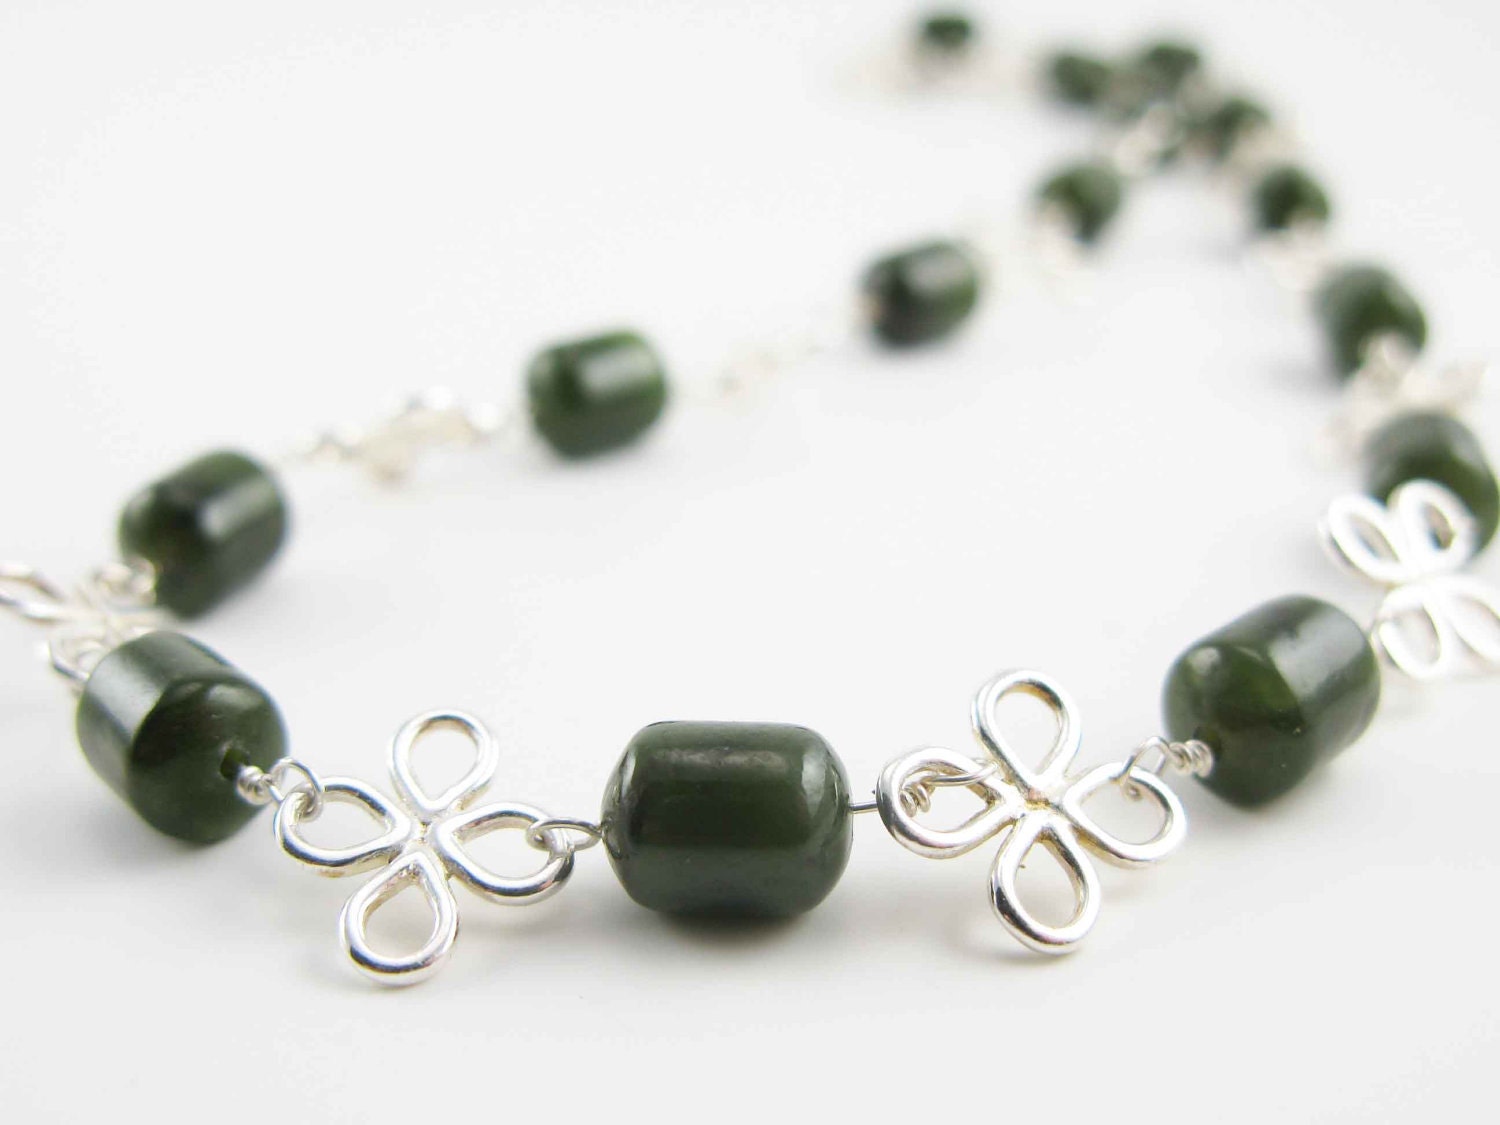 On Vacation NONA: Reproduction Roman Necklace - sterling silver flowers and Nephrite Jade - assembled by hand - mejjewelry